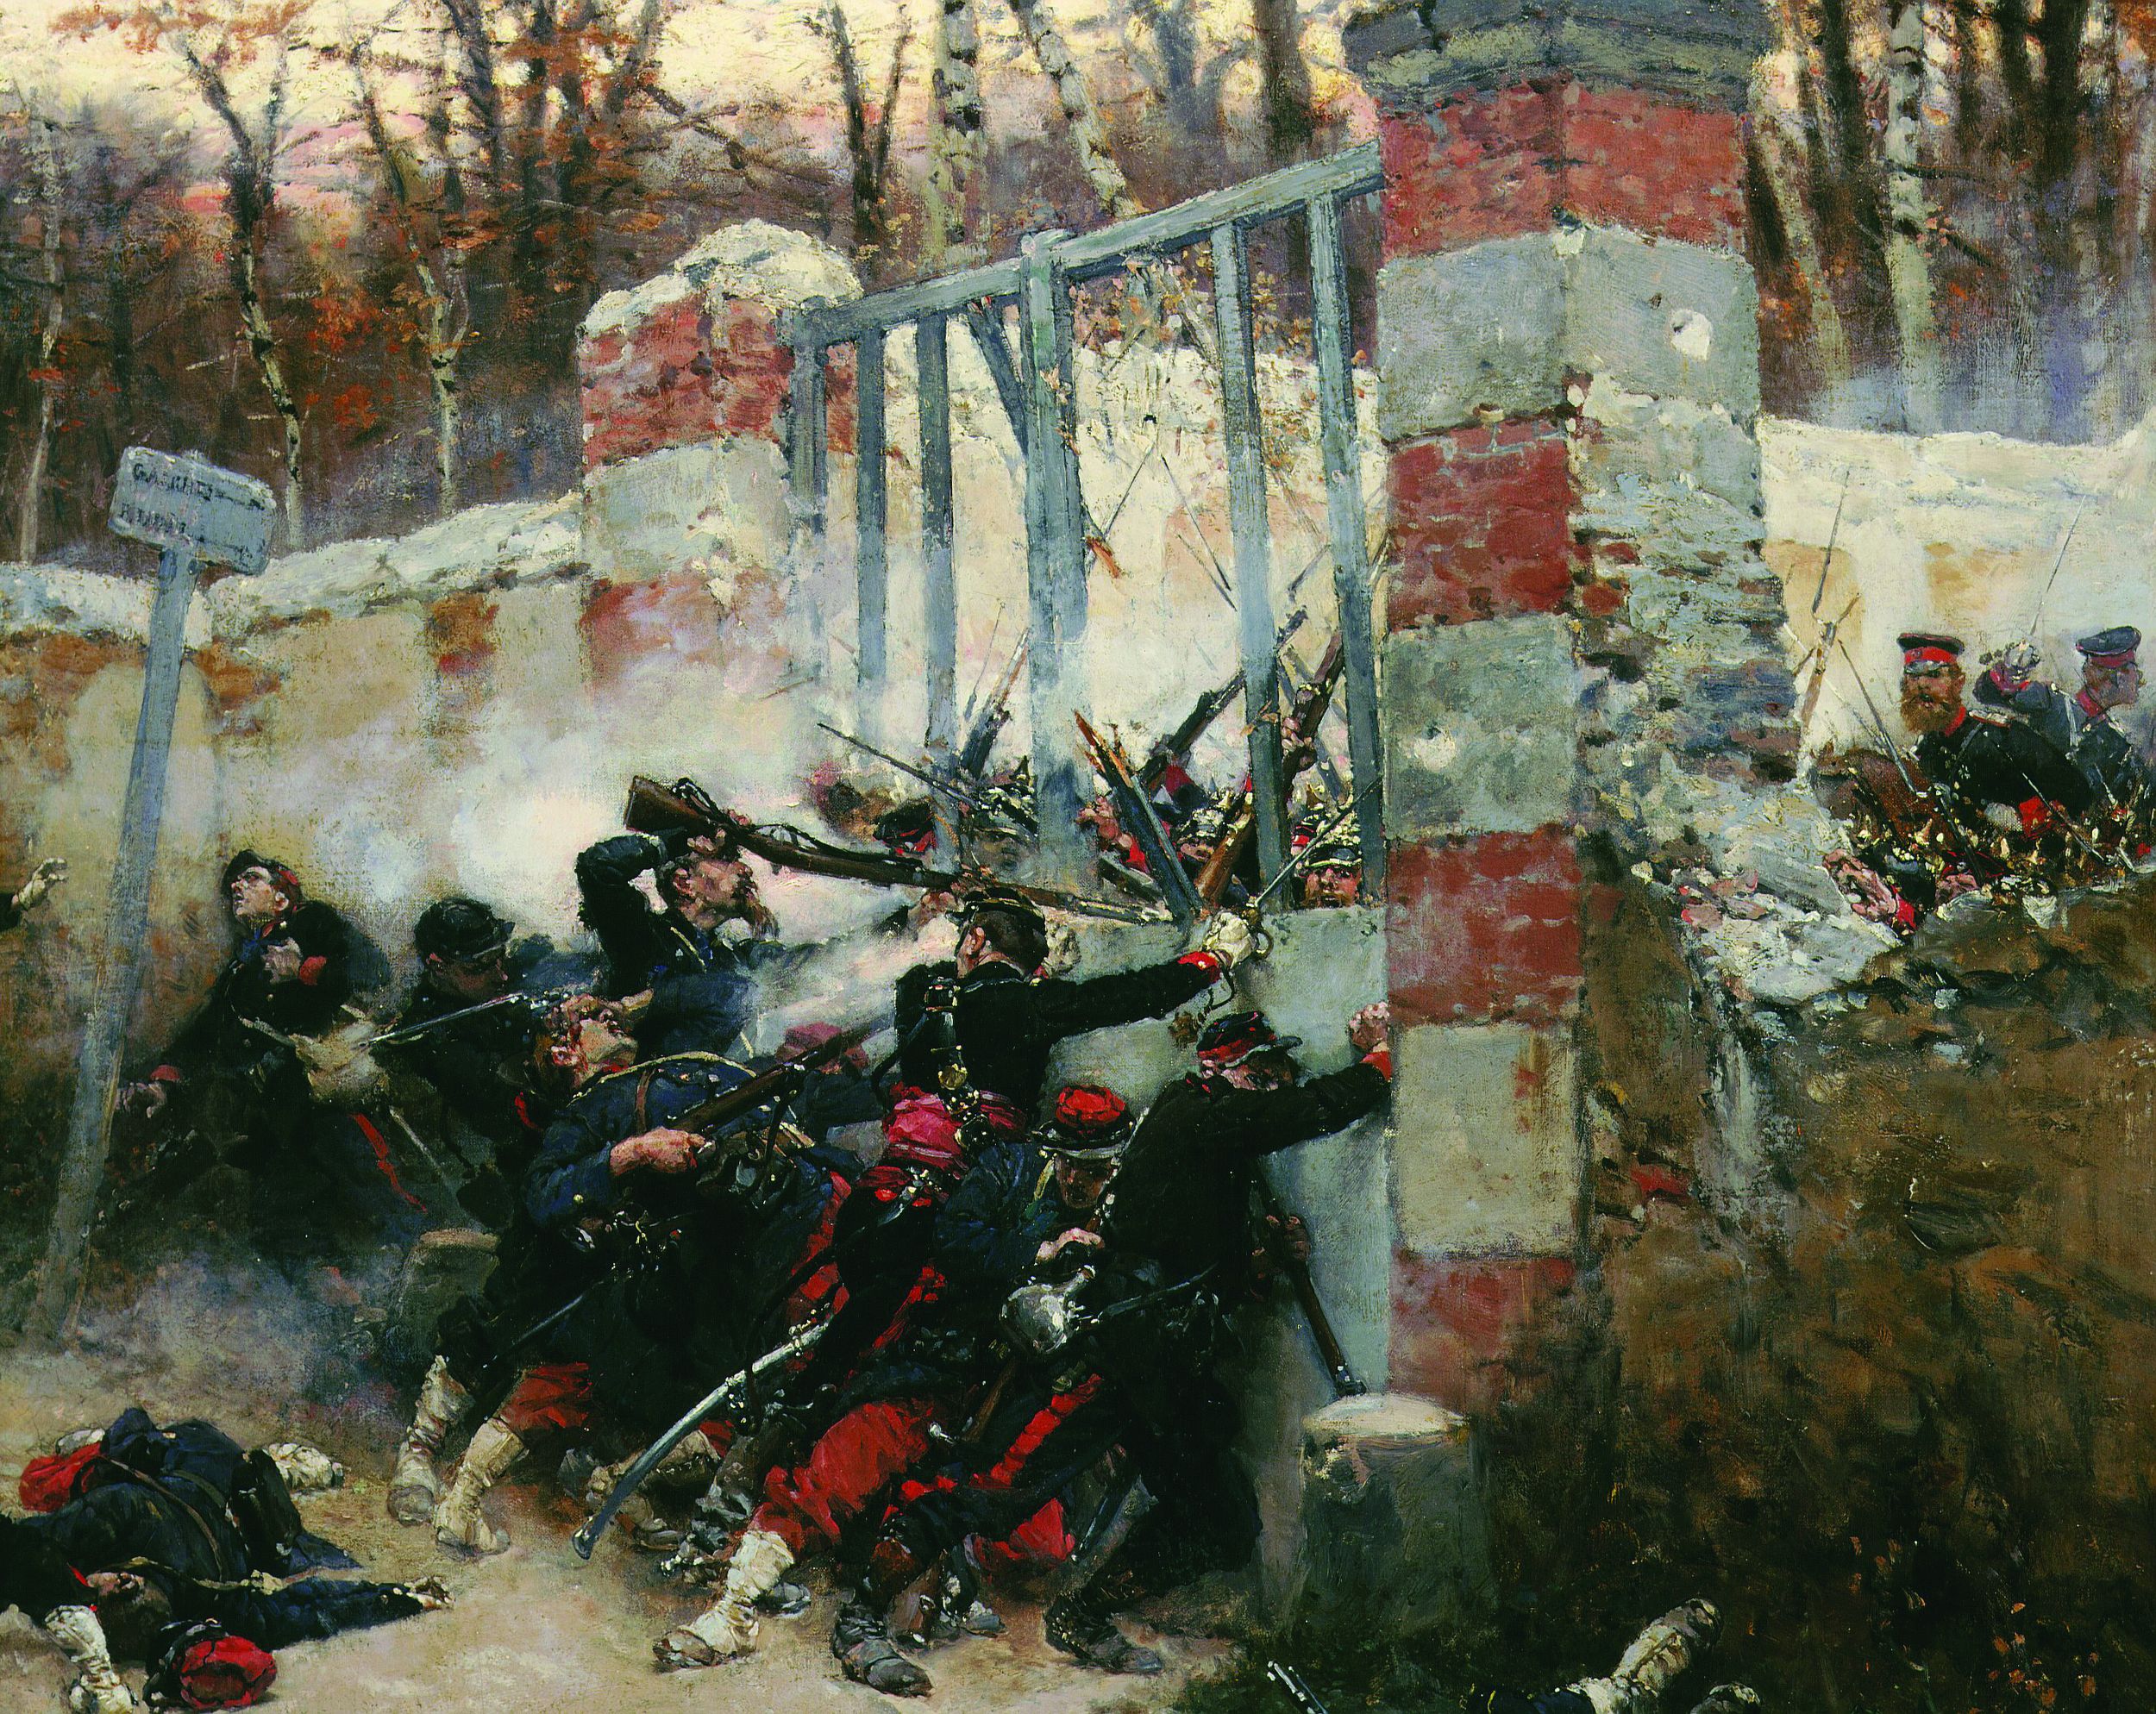 French soldiers attack the Longboyau Gate at Buzenval, France, in January 1871.